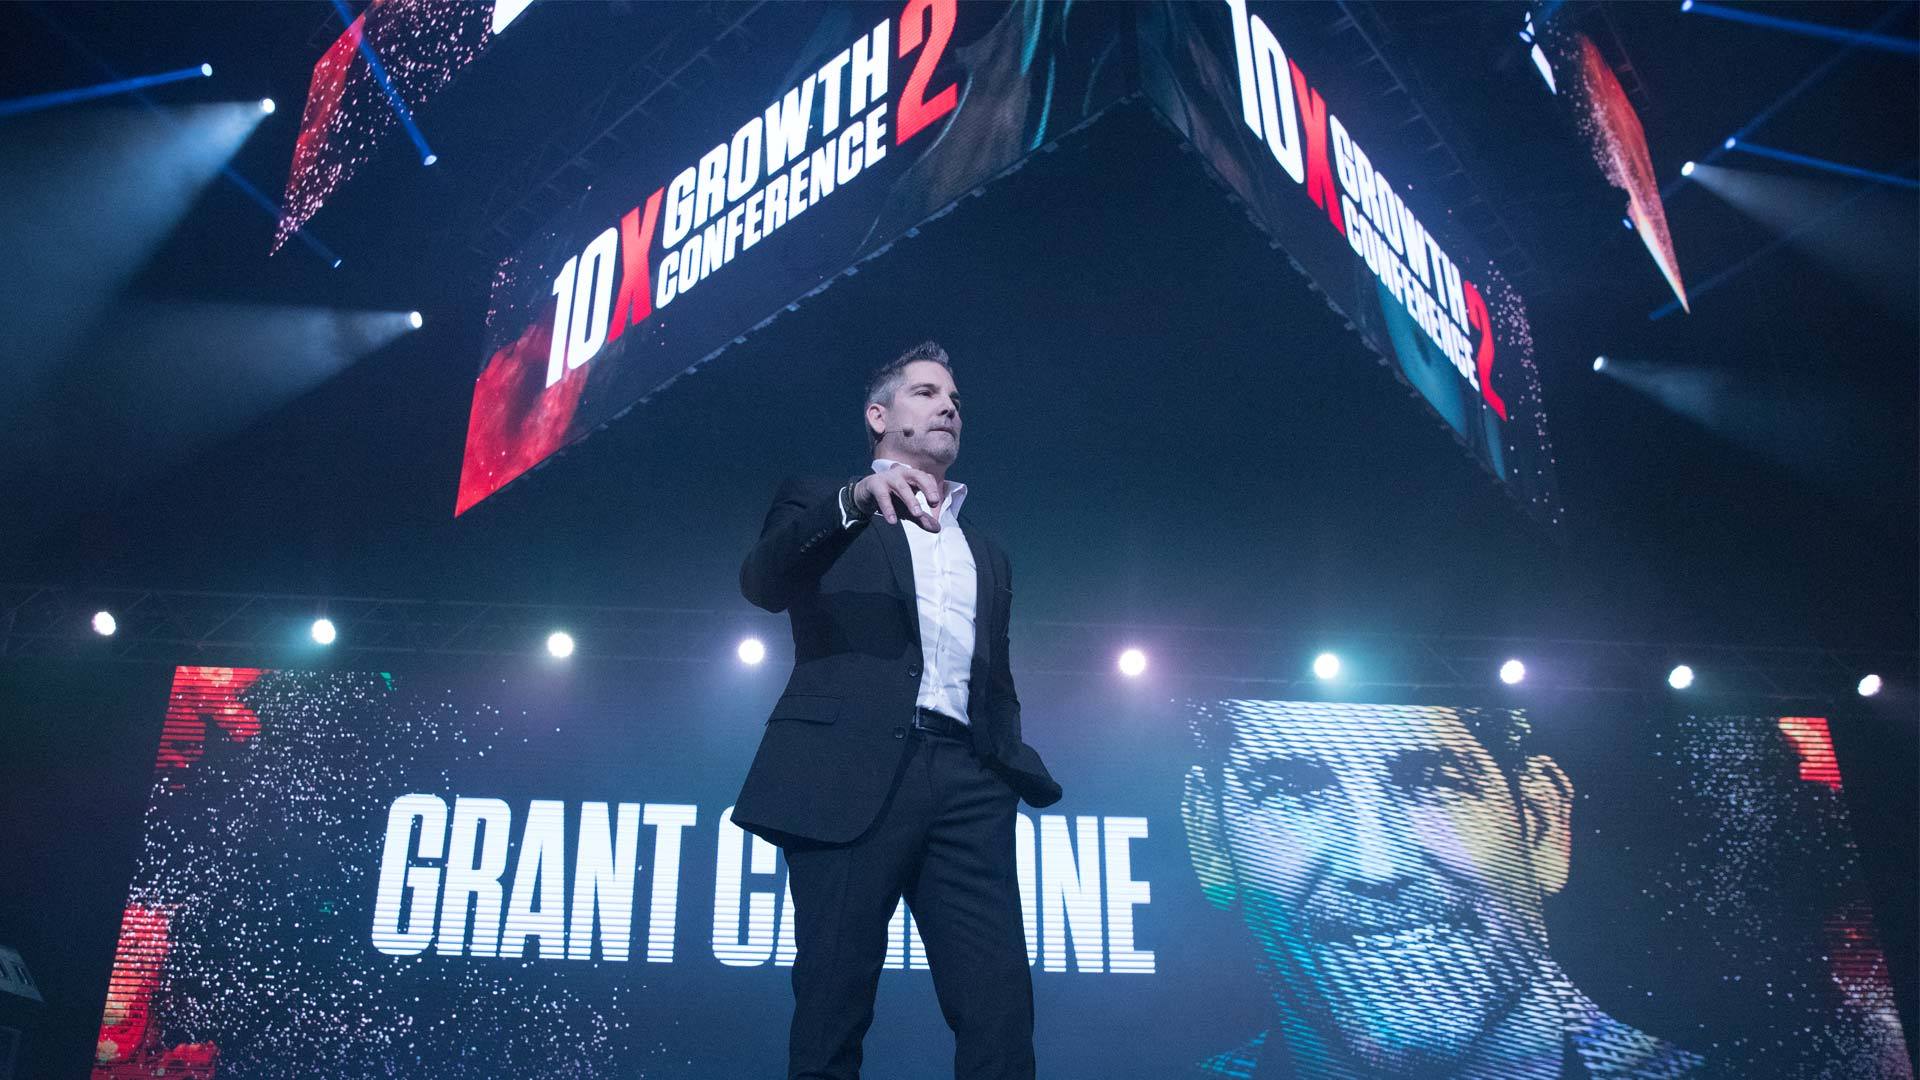 10x-growth-conference-2-is-happening-right-now-in-vegas-grant-cardone